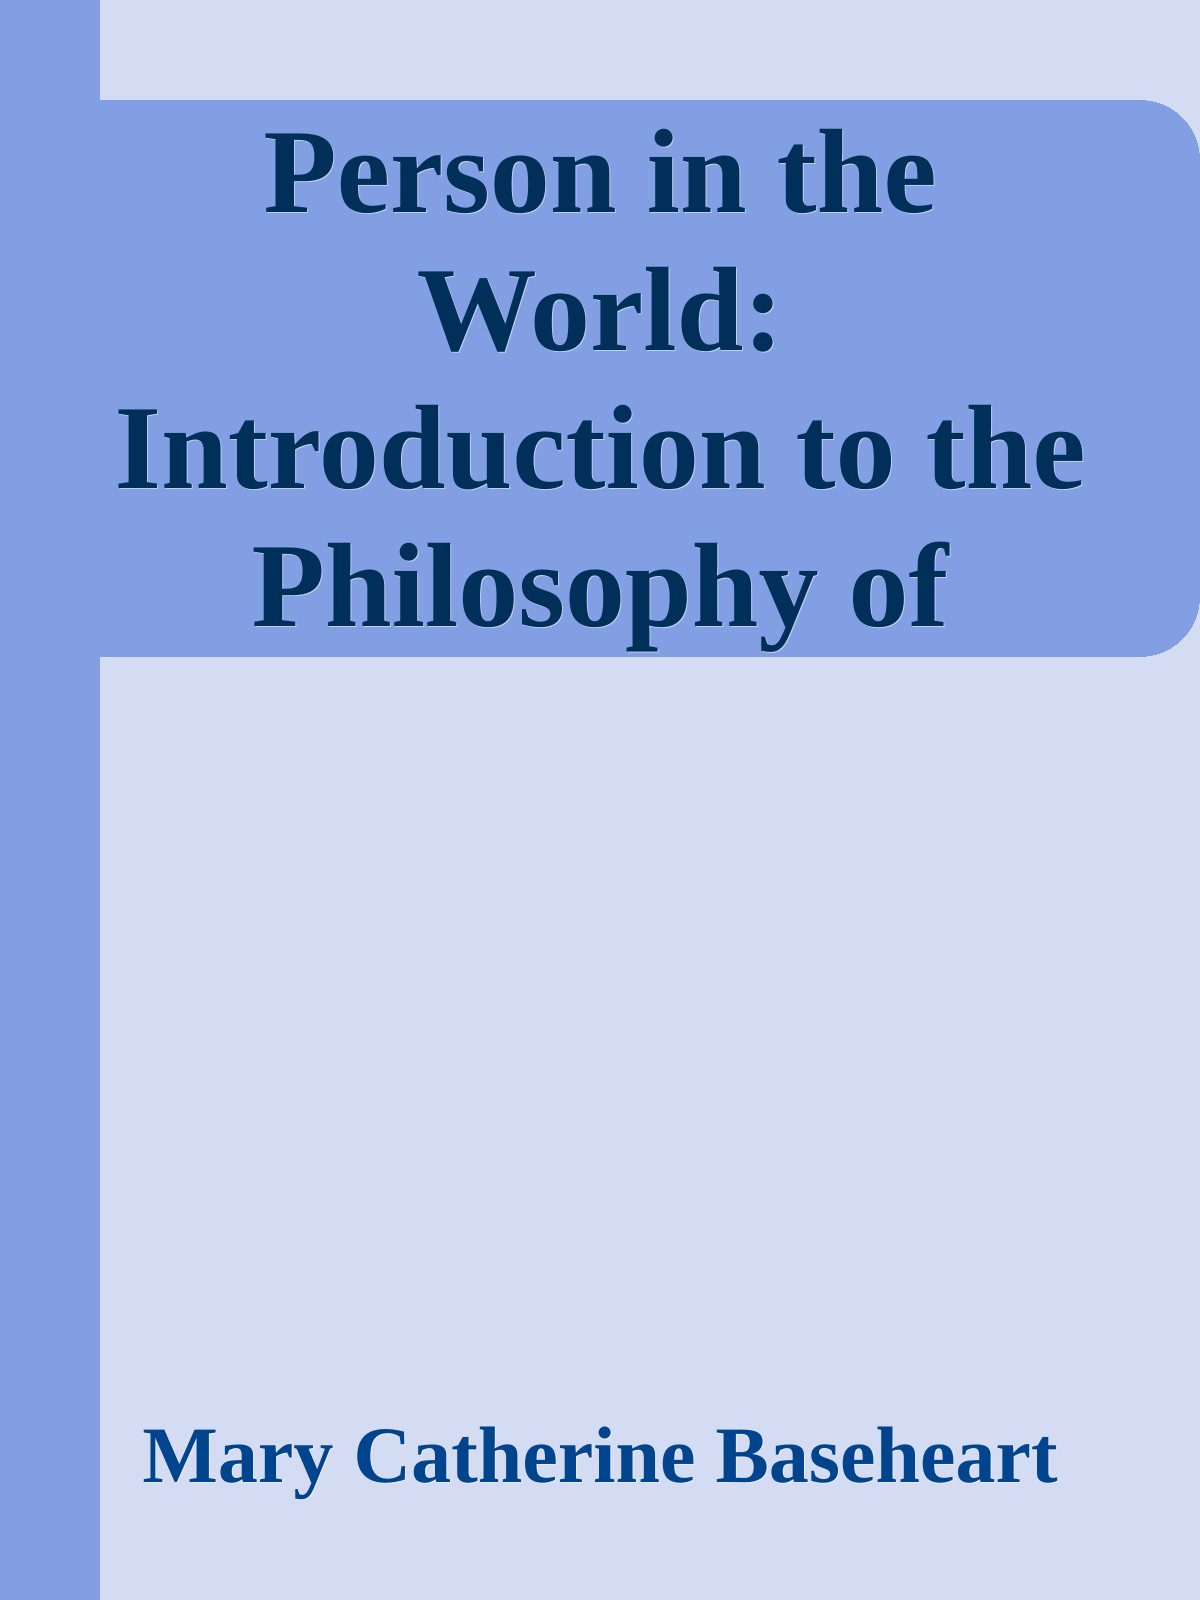 Person in the World: Introduction to the Philosophy of Edith Stein